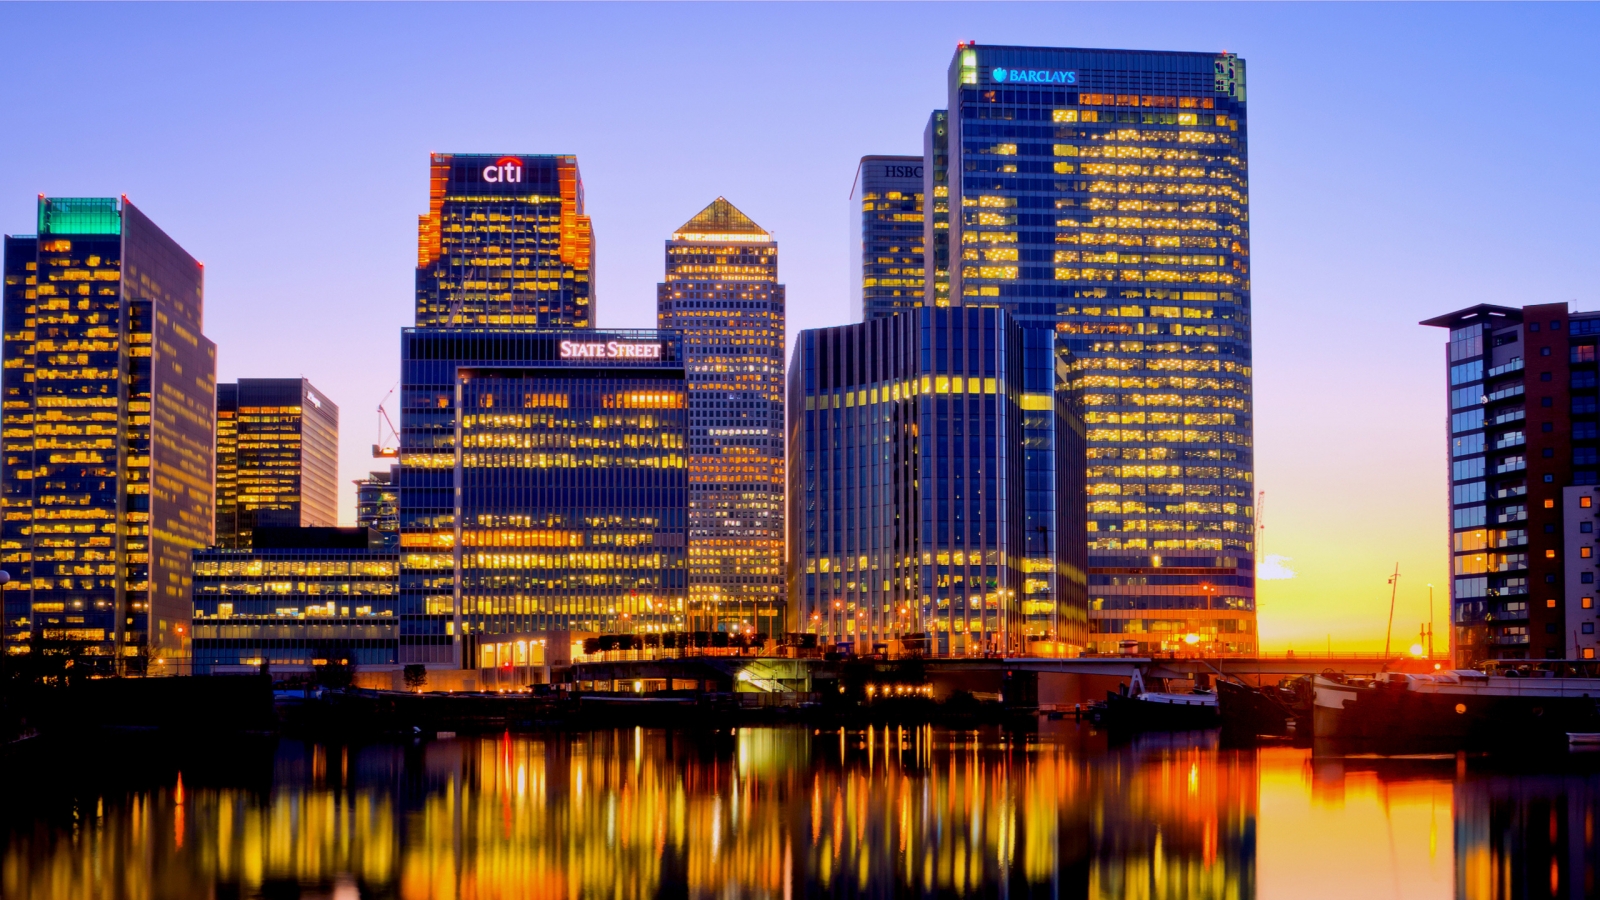 London Canary Wharf for 1600 x 900 HDTV resolution